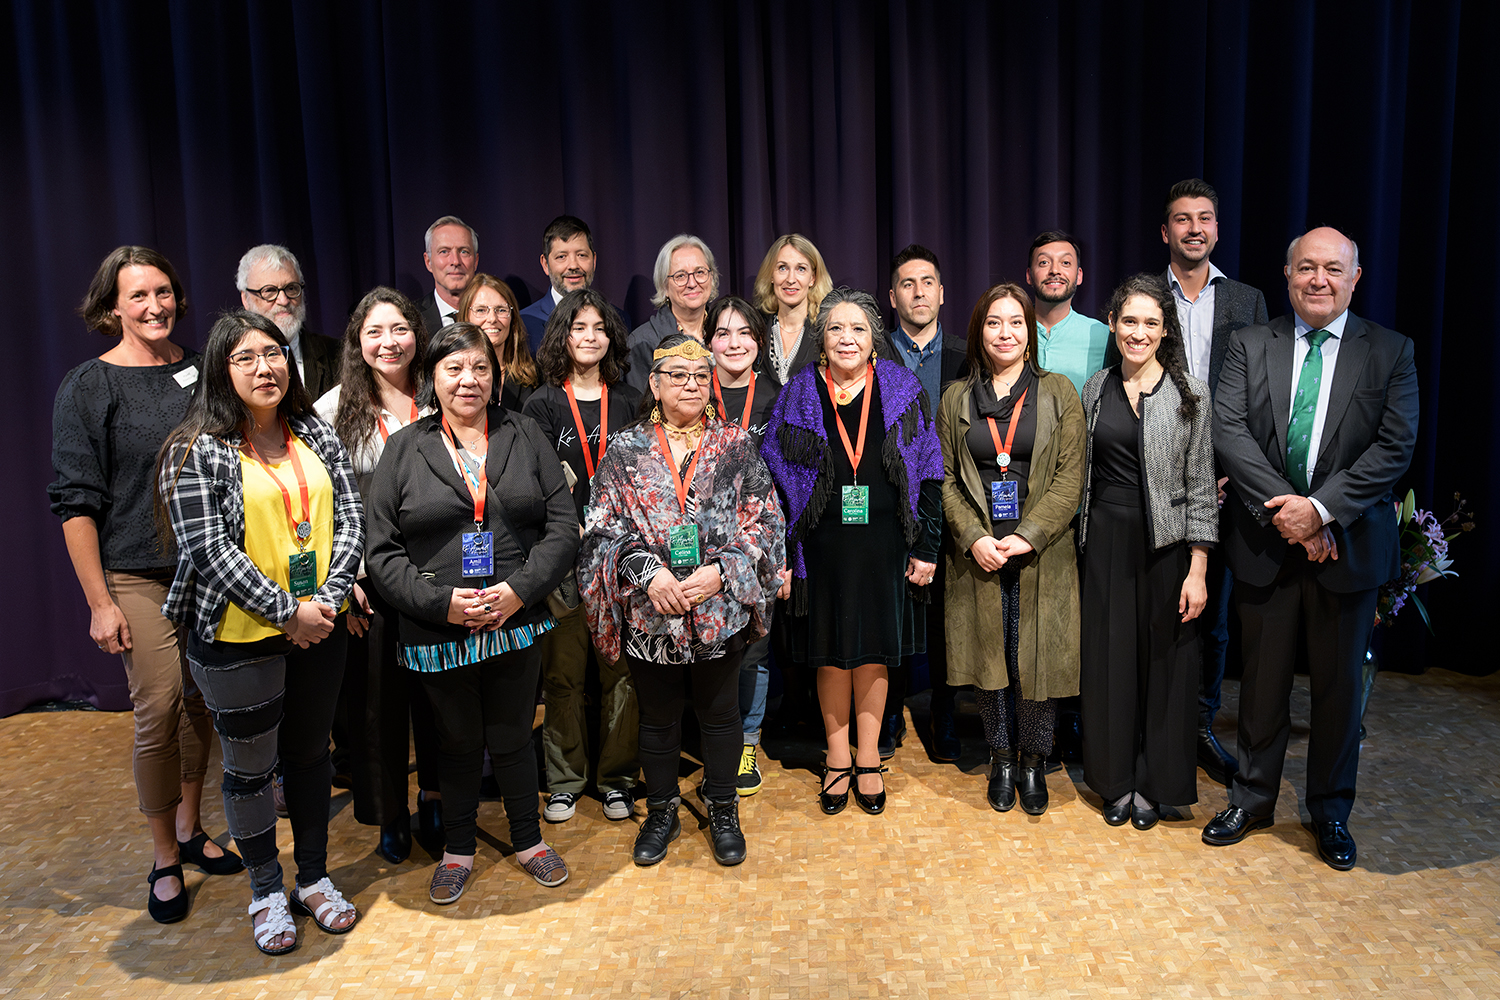 The Kawésqar delegation with representatives of various embassies (including Chile), the city of Zurich and the university management, as well as other guests of honour. Photo: Kathrin Leuenberger, UZH Ethnolographic Museum, 2023.